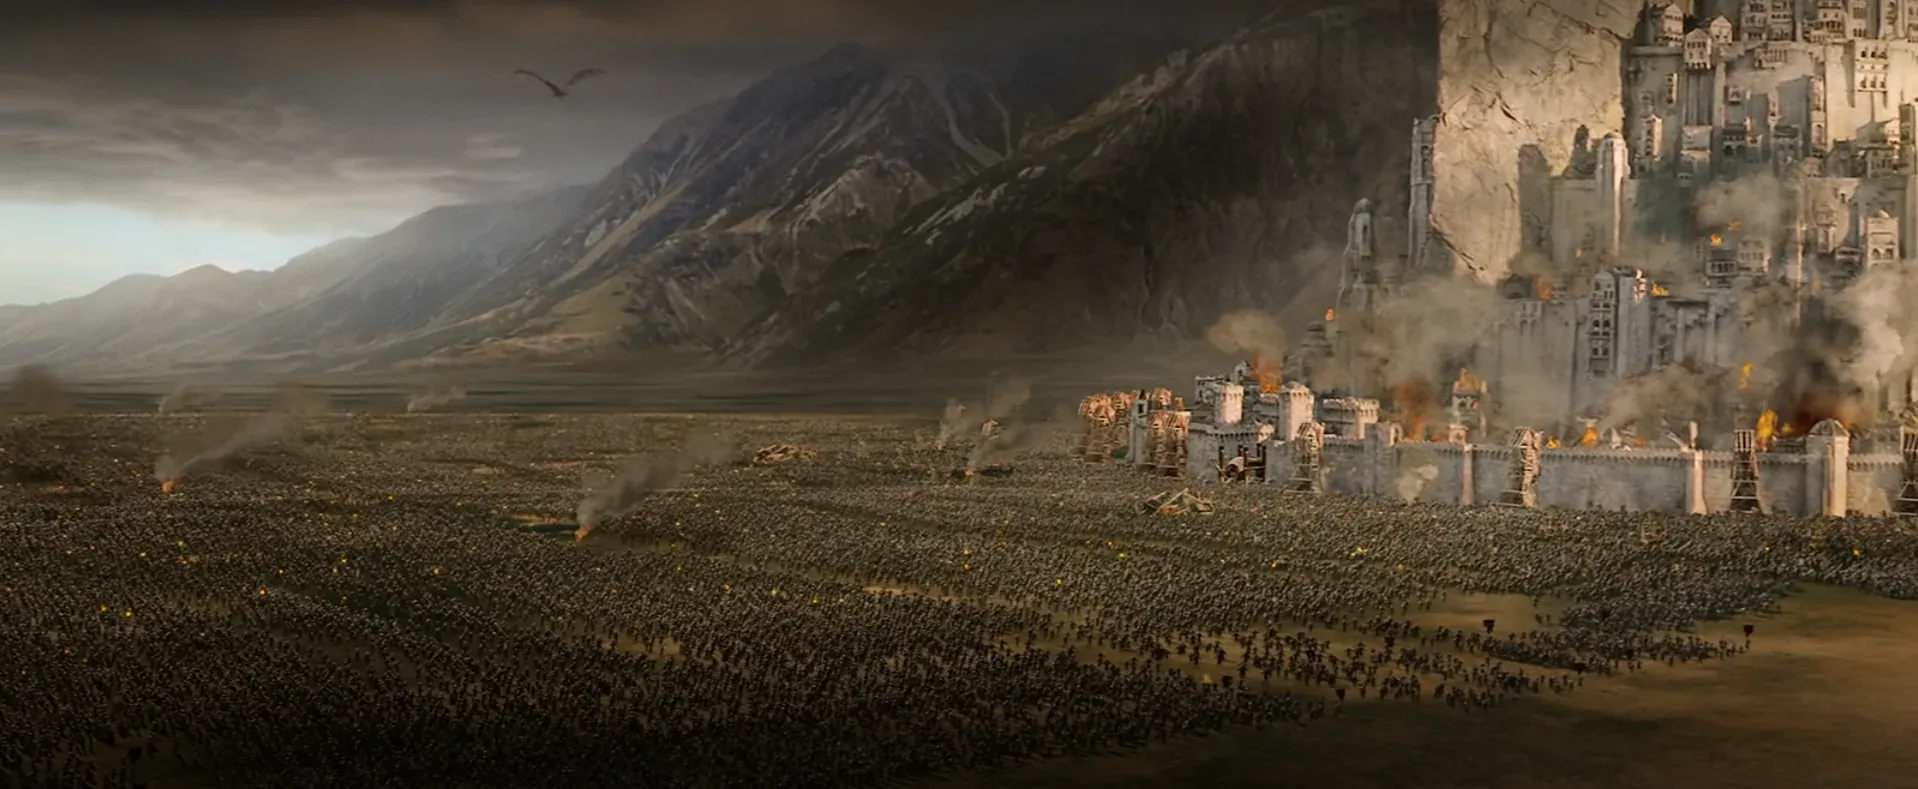 The Battle of the Pelennor Fields, as depicted in the 2003 film, The Lord of the Rings: The Return of the King.